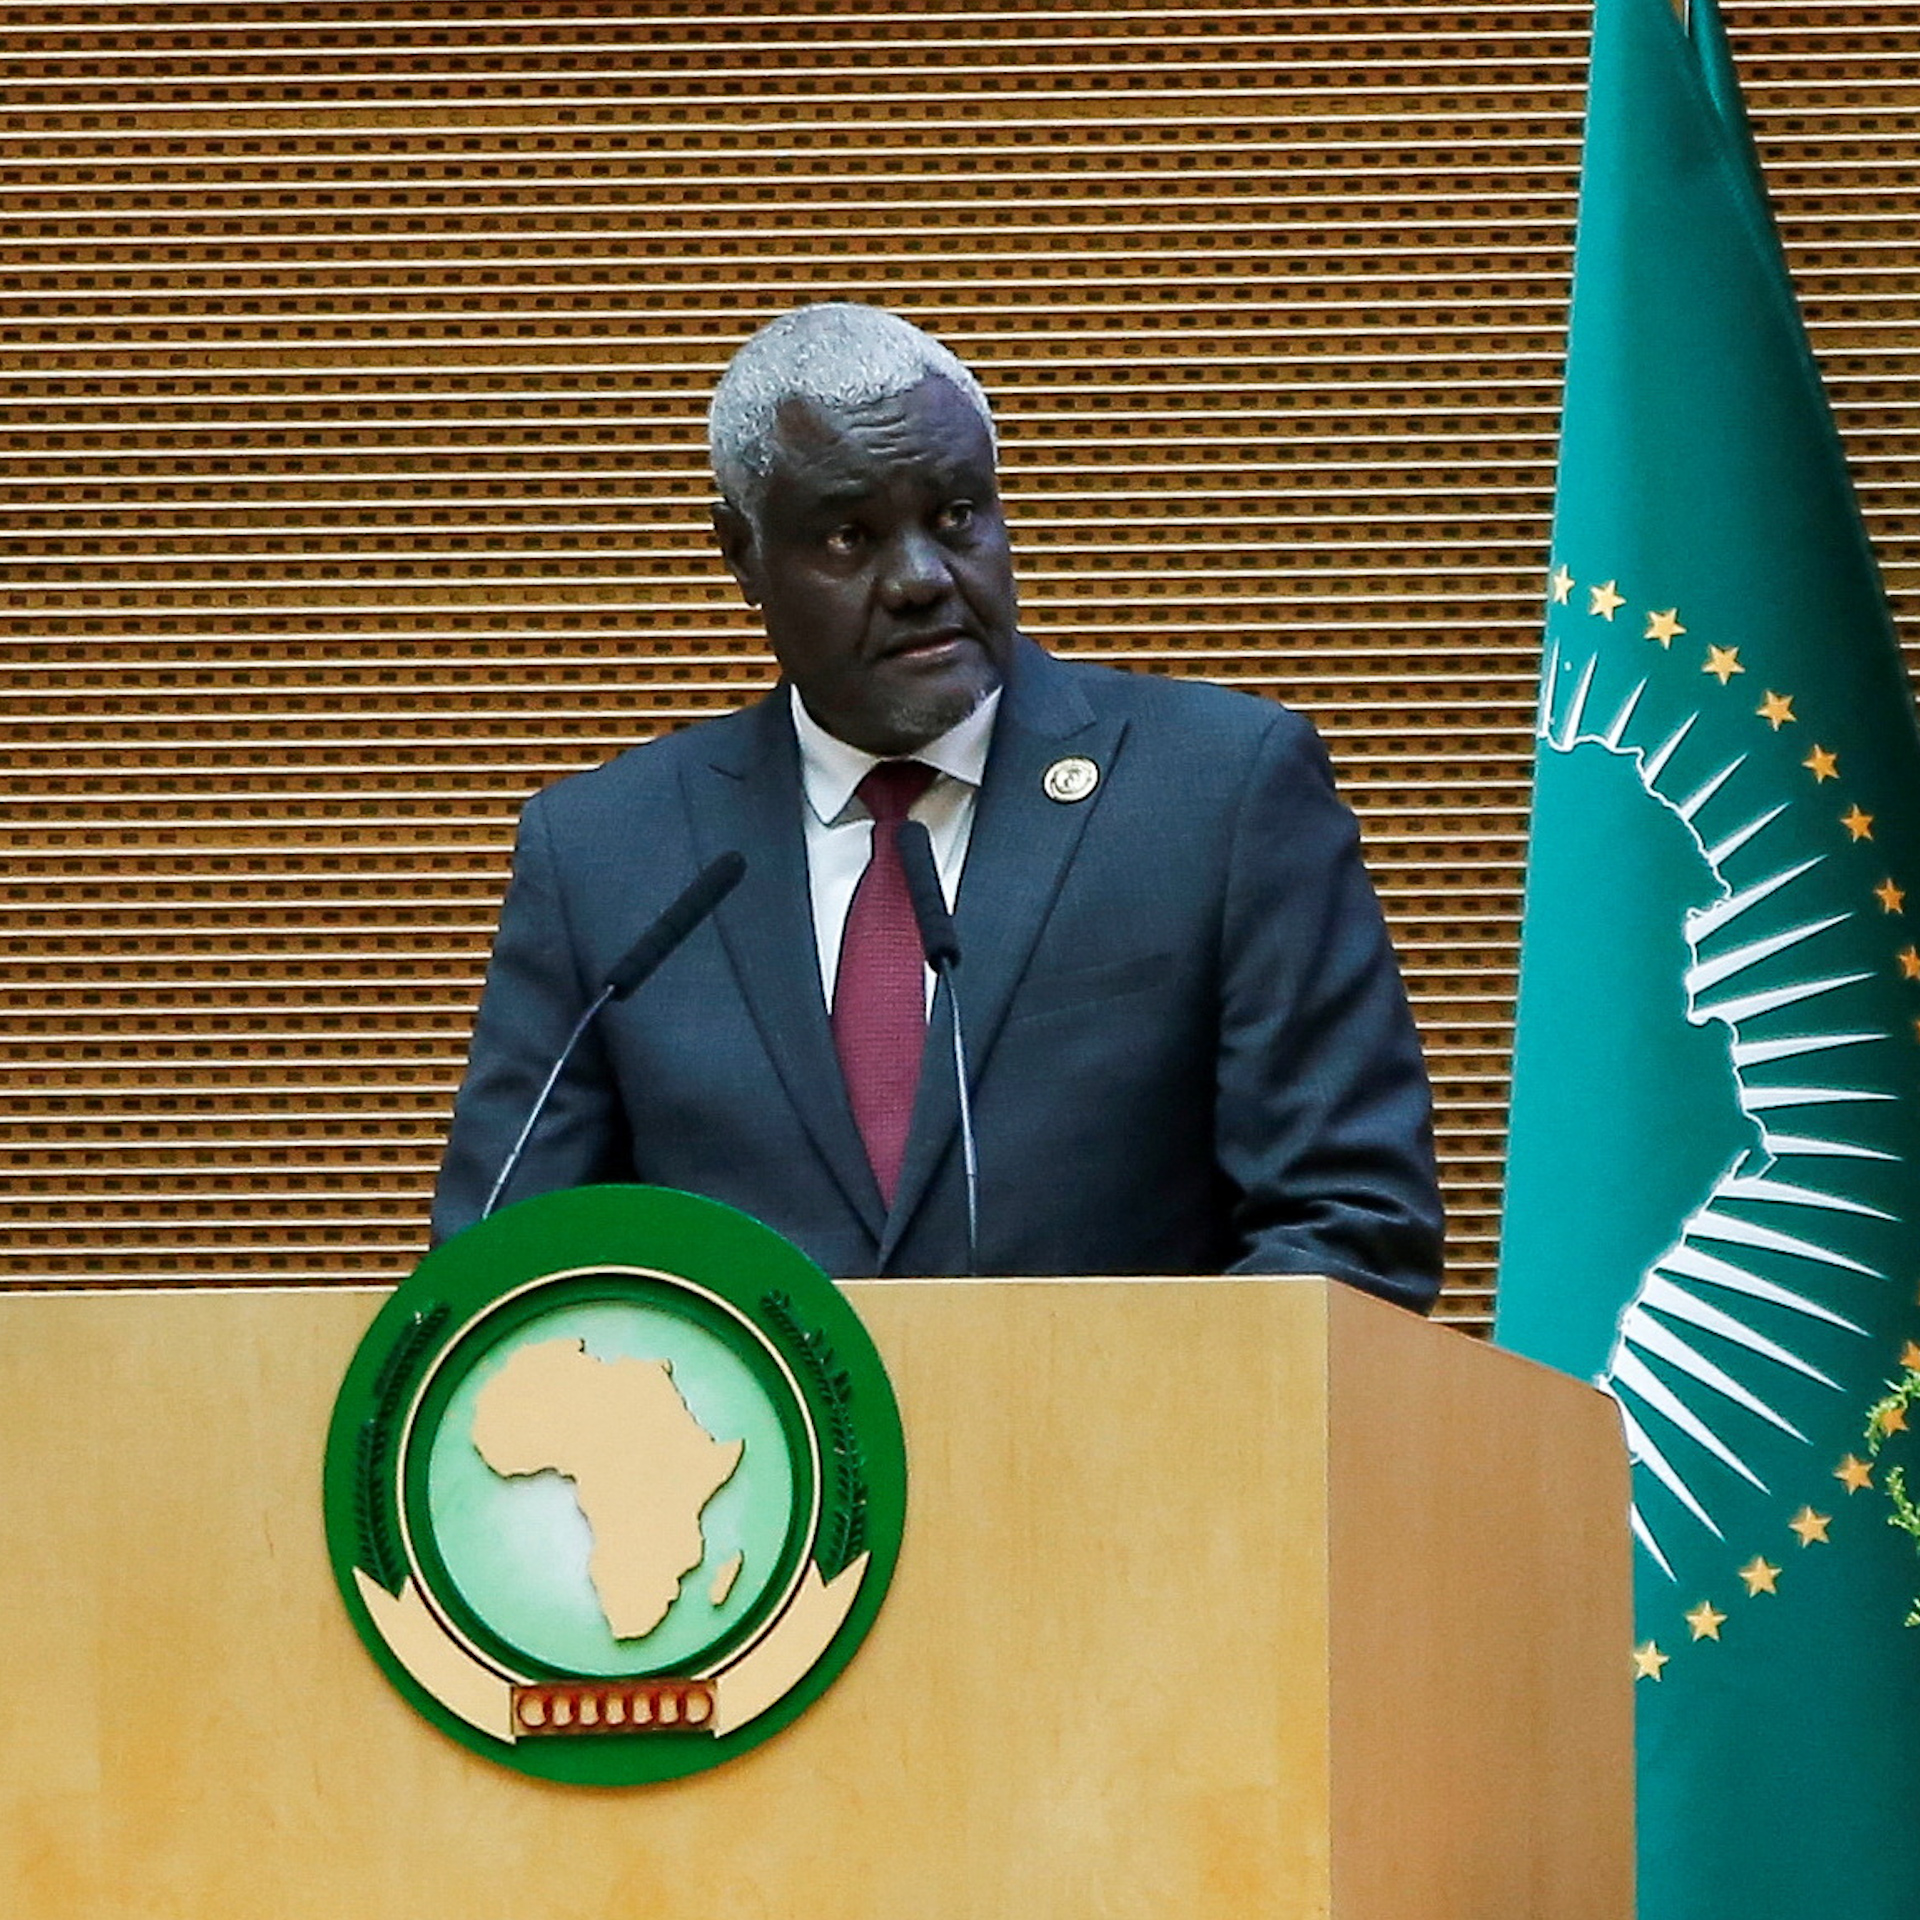 African Union Commission Chairperson Moussa Faki Mahamat, addresses the opening of the 37th Ordinary Session of the Assembly of the African Union.